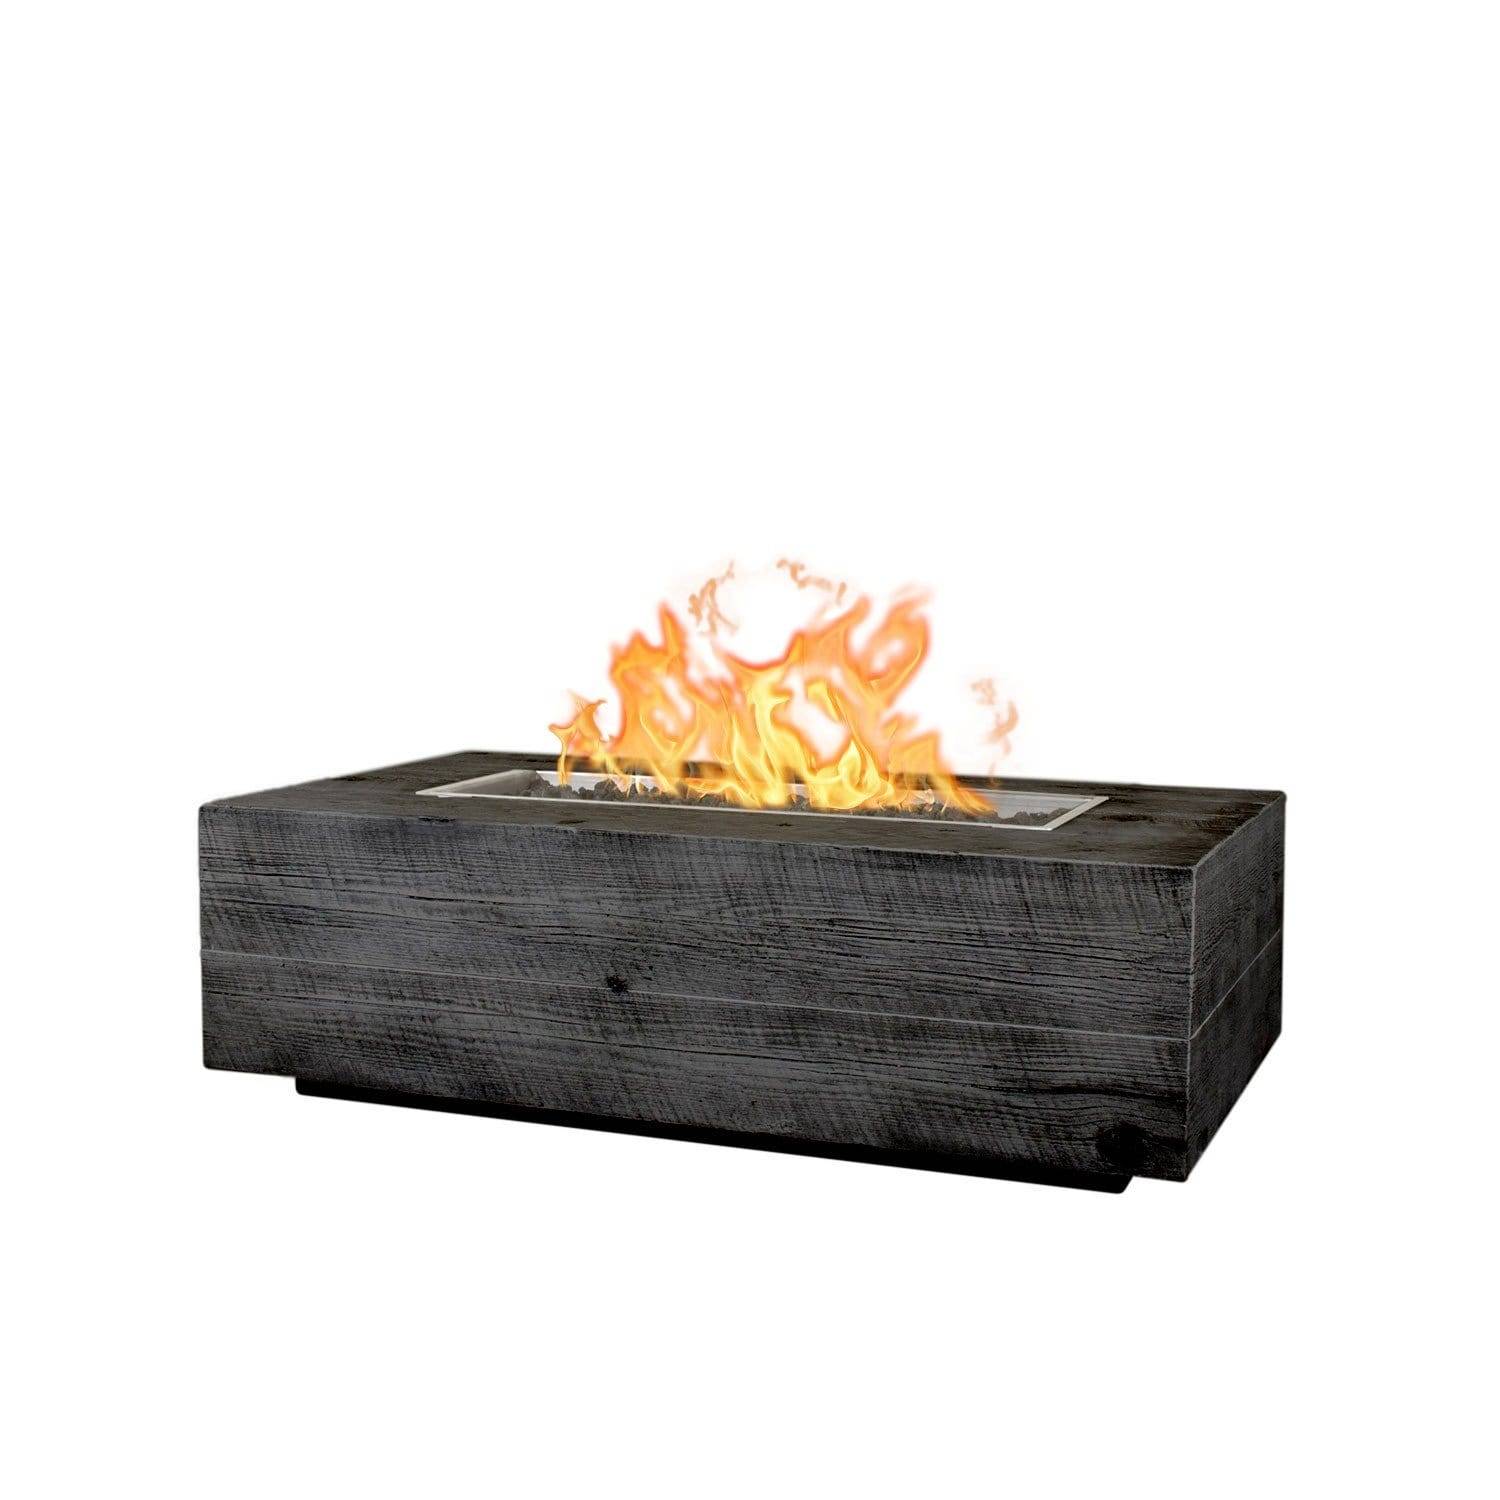 The Outdoor Plus Coronado Wood Grain Fire Pit in Ebony with flame on white background